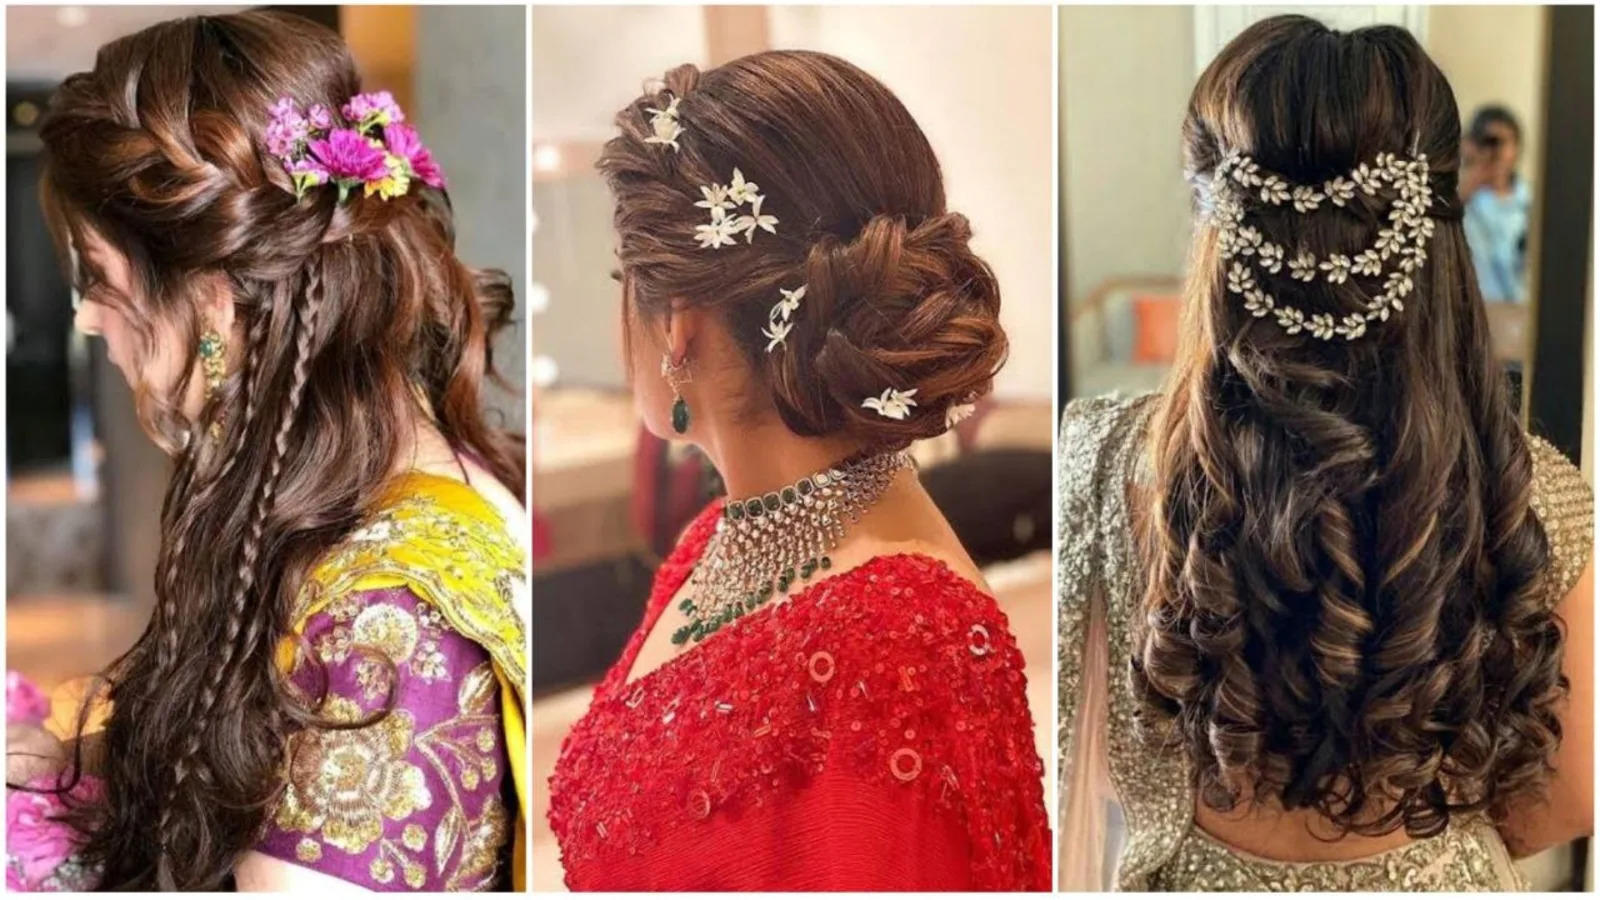 These hairstyles are best for propose day